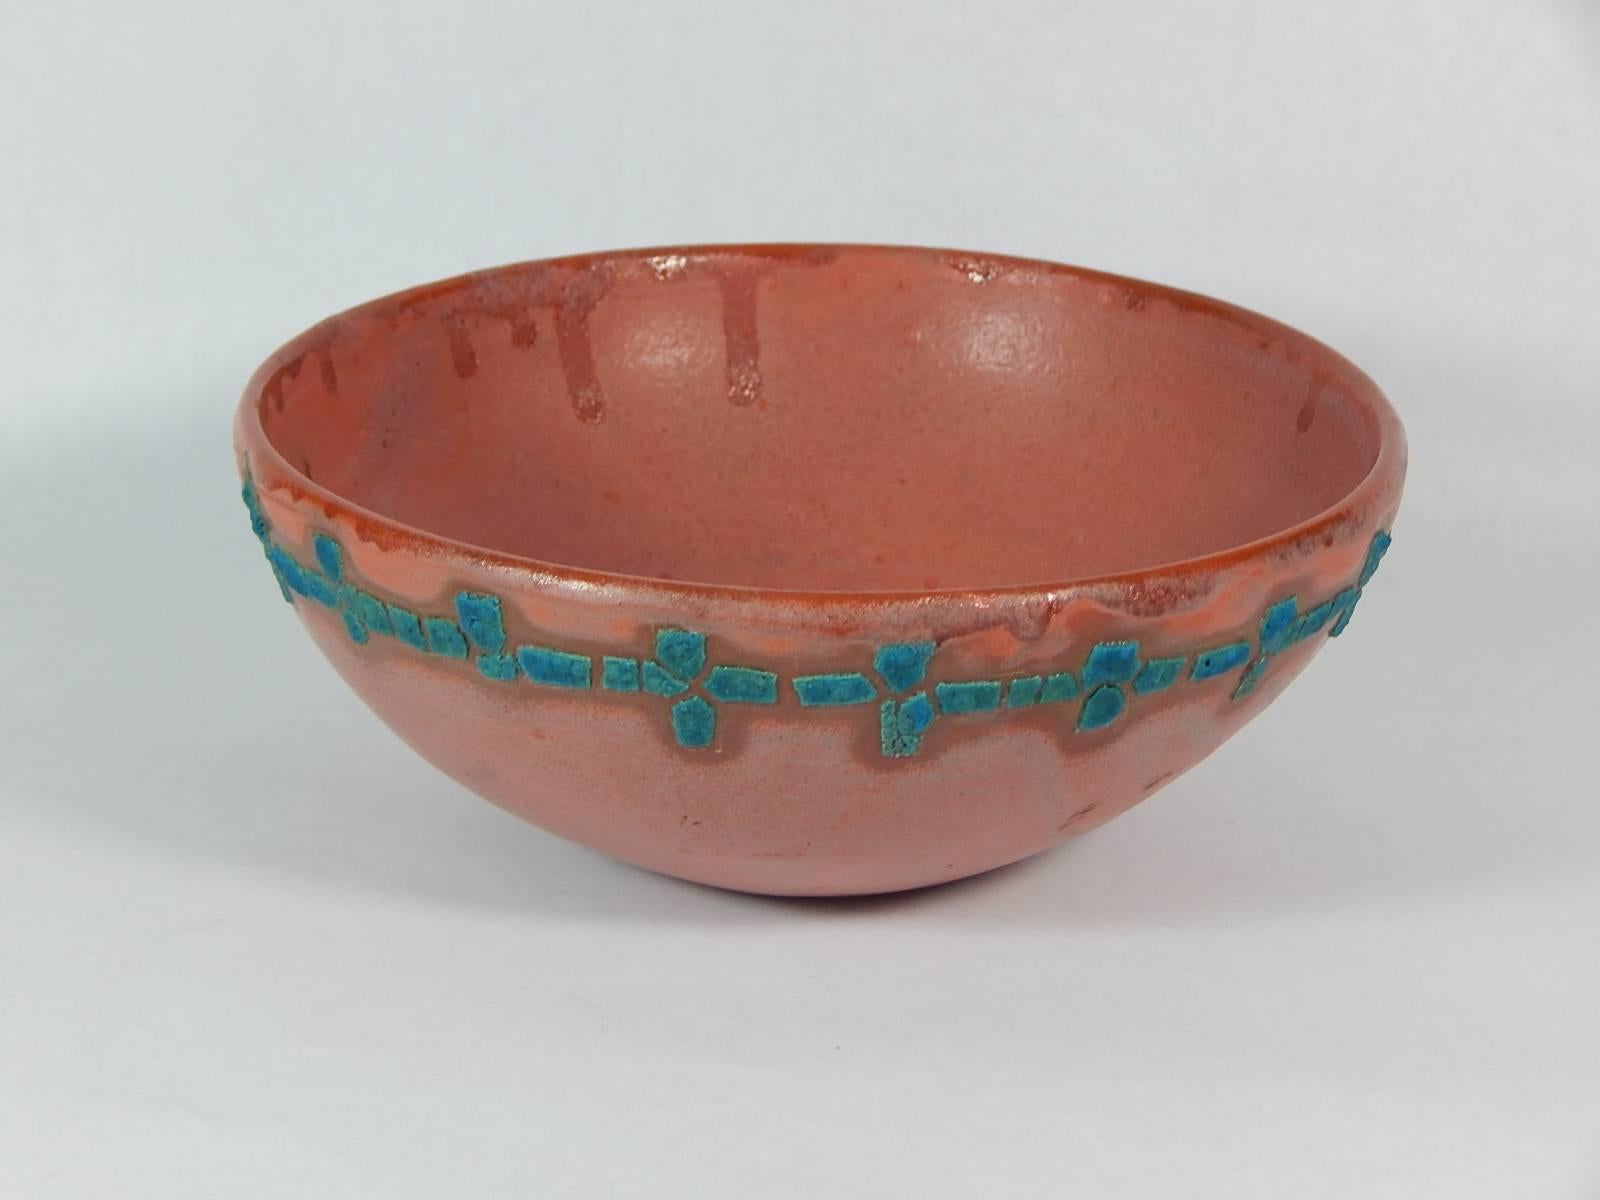 Relicware wheel thrown earthenware bowl by Andrew Wilder # 73. In terra cotta with turquoise lichen glaze and terra cotta colored overglaze. Made by hand in Los Angeles, California, 2017.
 